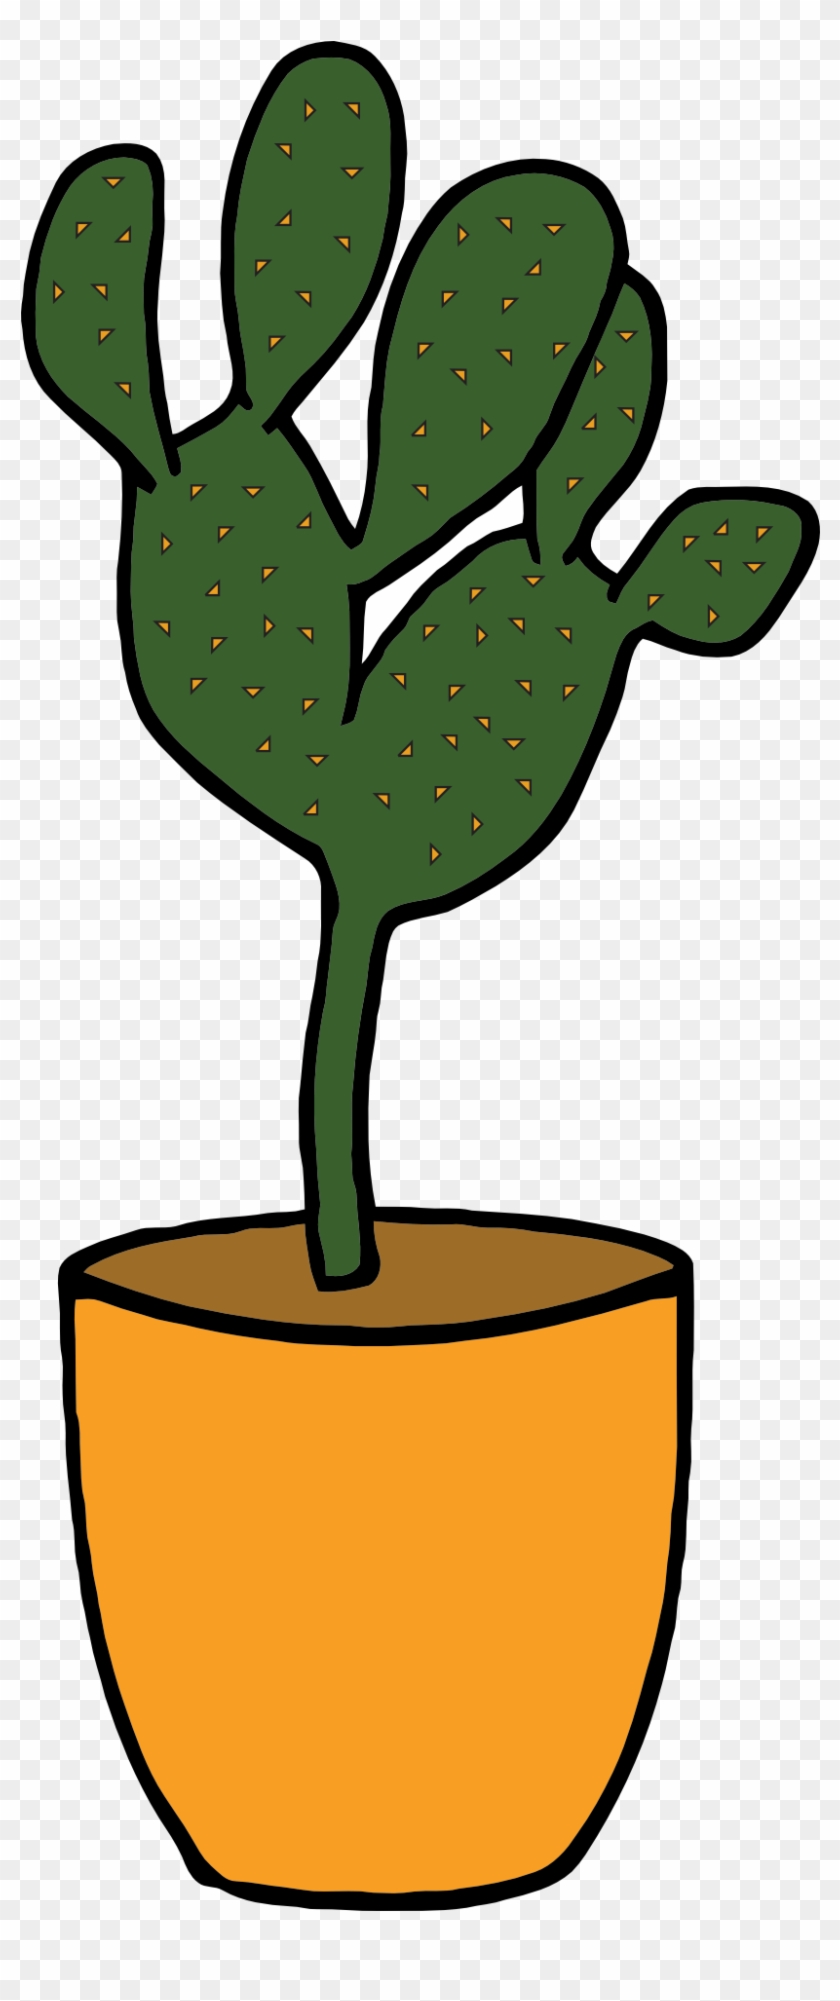 Drawing Of A Green Potted Cactus - Cactus Clipart